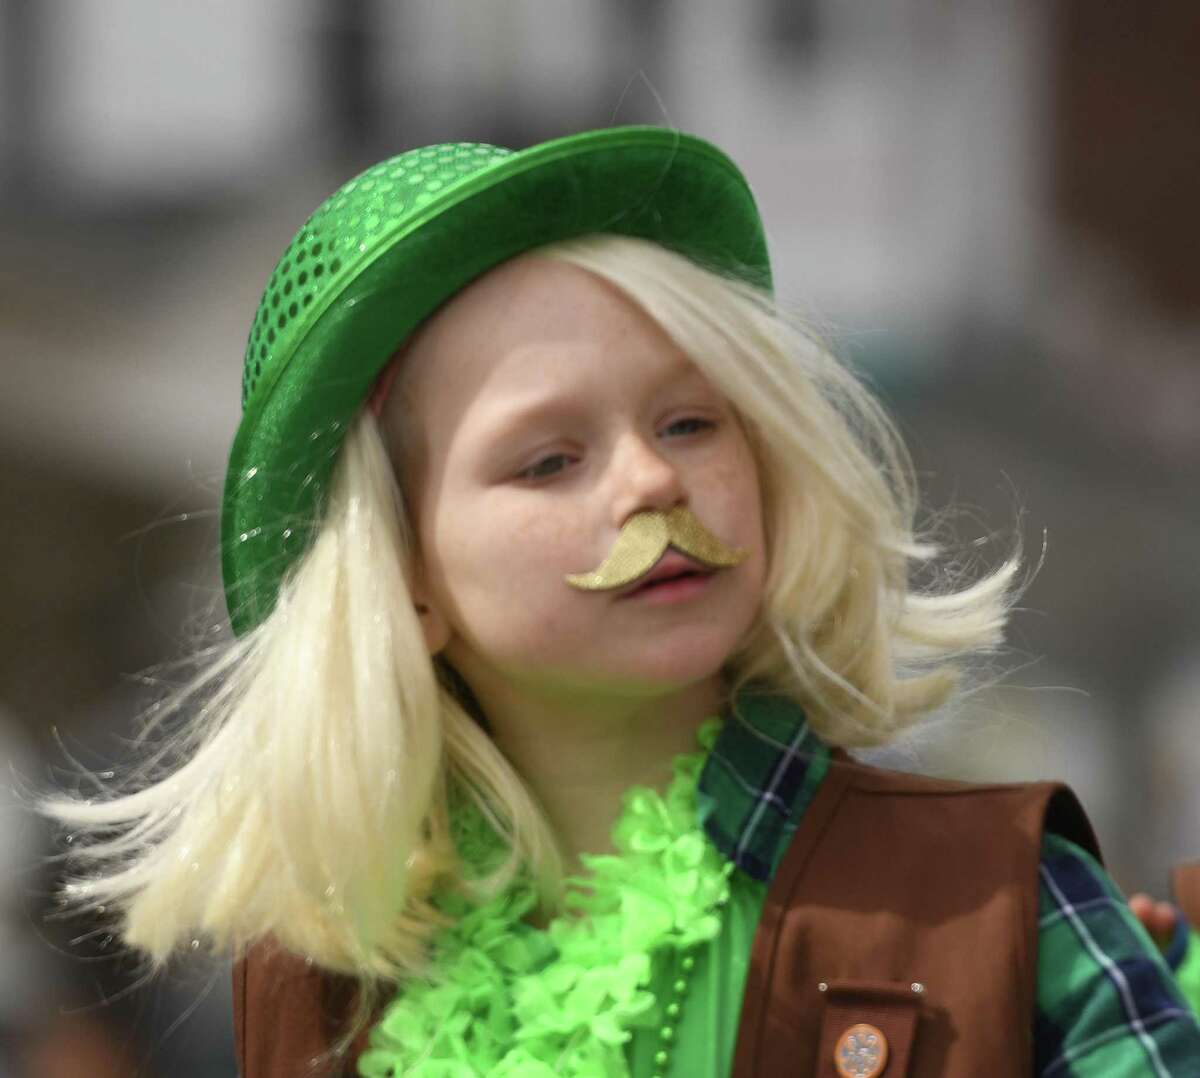 Photos from the annual St. Patrick's Day Parade in Greenwich, Conn. Sunday, March 24, 2019. Presented by the Greenwich Hibernian Association, the parade featured Irish bagpipe music, Irish dancers, floats from many local organizations, as well as Greenwich police, fire and EMS. After two years of cancellations due to COVID, the parade is scheduled to return on March 20 at 2 p.m.